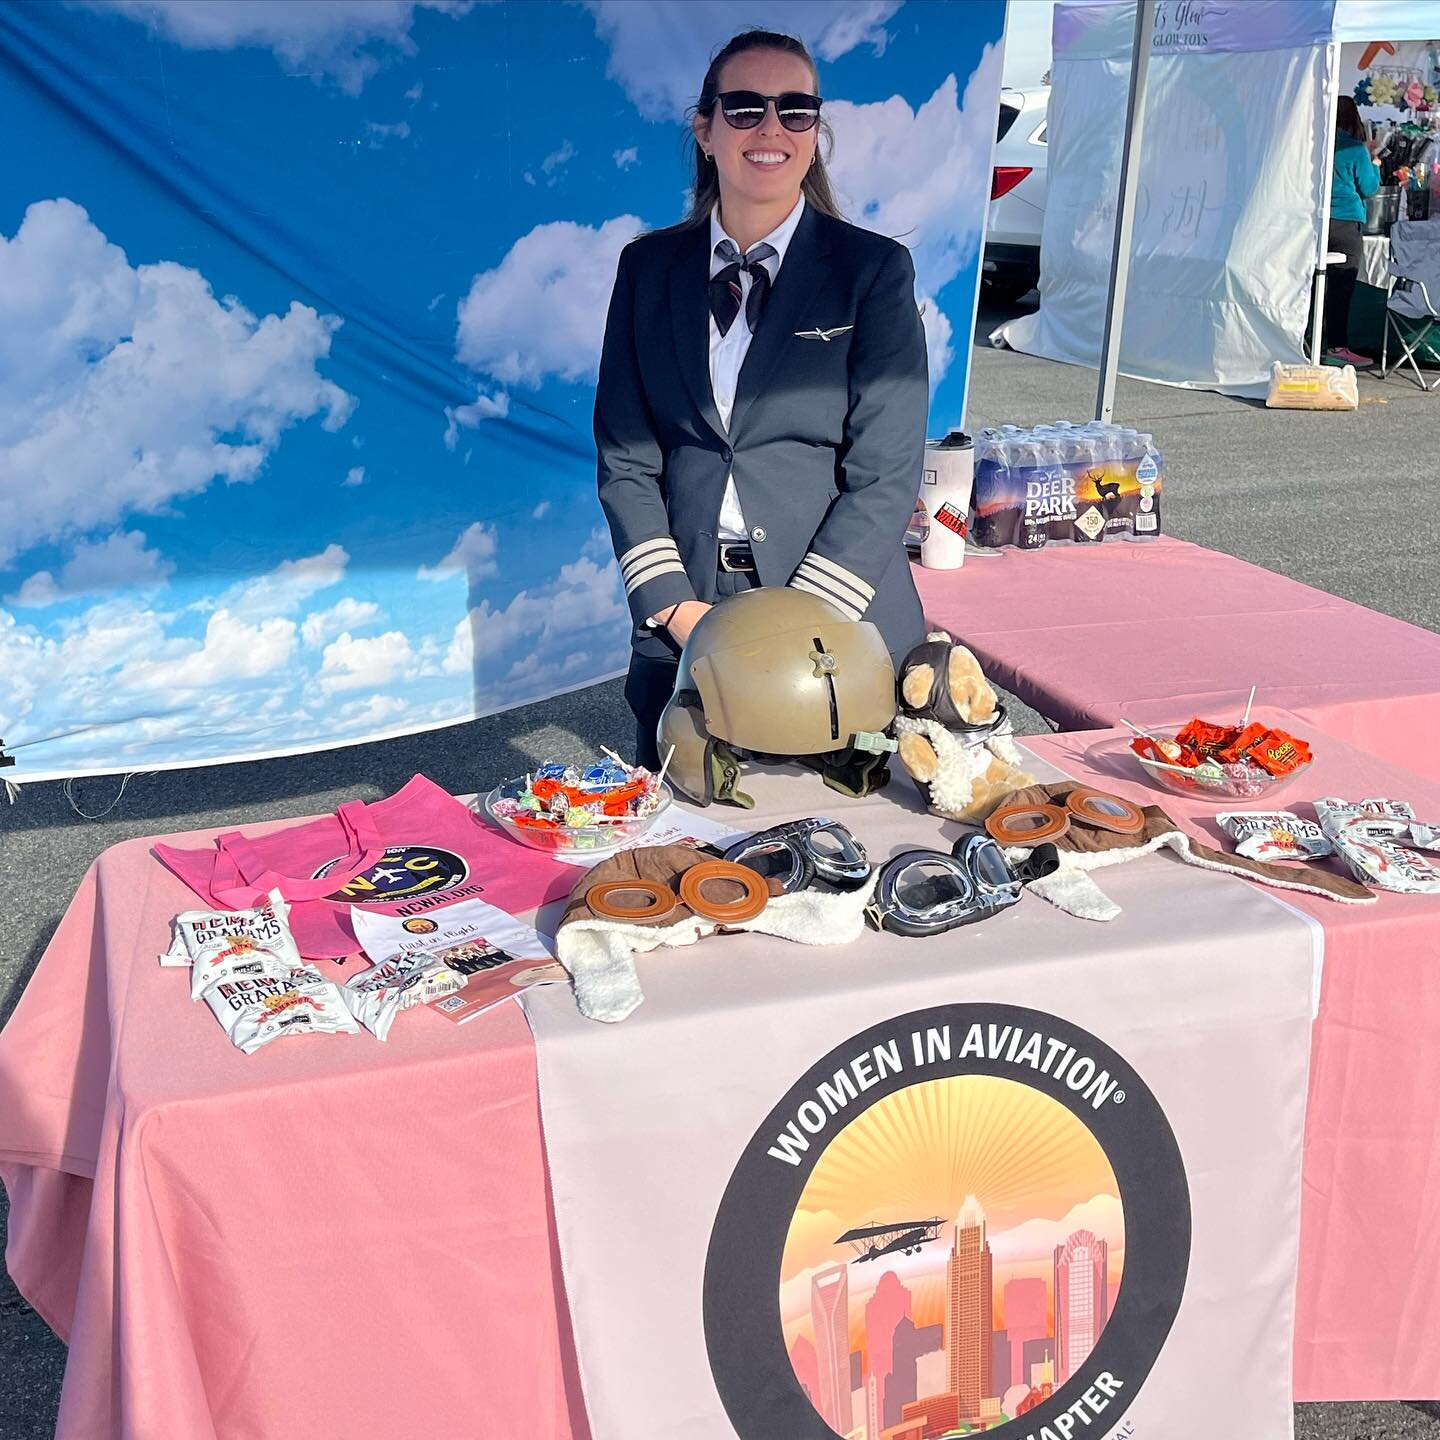 We're so excited to be able to represent @womeninaviation with our First in Flight Chapter booth at the 15th Annual Warbirds Over Monroe Air Show featuring Tora! Tora! Tora! - the reenactment of Pearl Harbor! (Swipe for some pics of planes at the eve